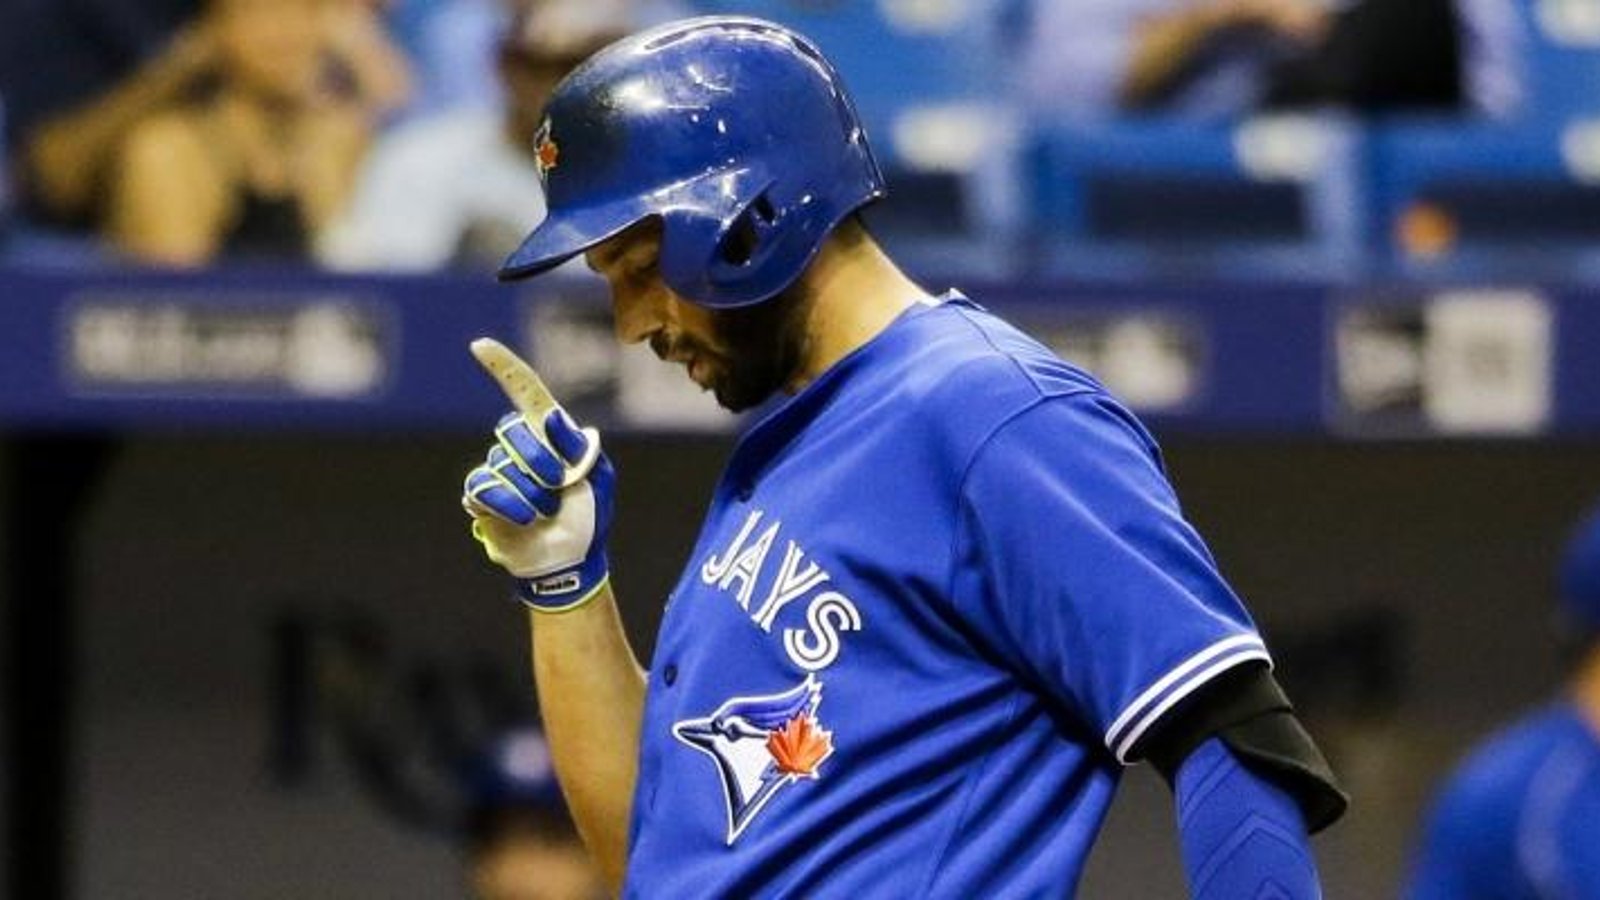 Breaking: Blue Jay suspended for a whopping 80 games by MLB.